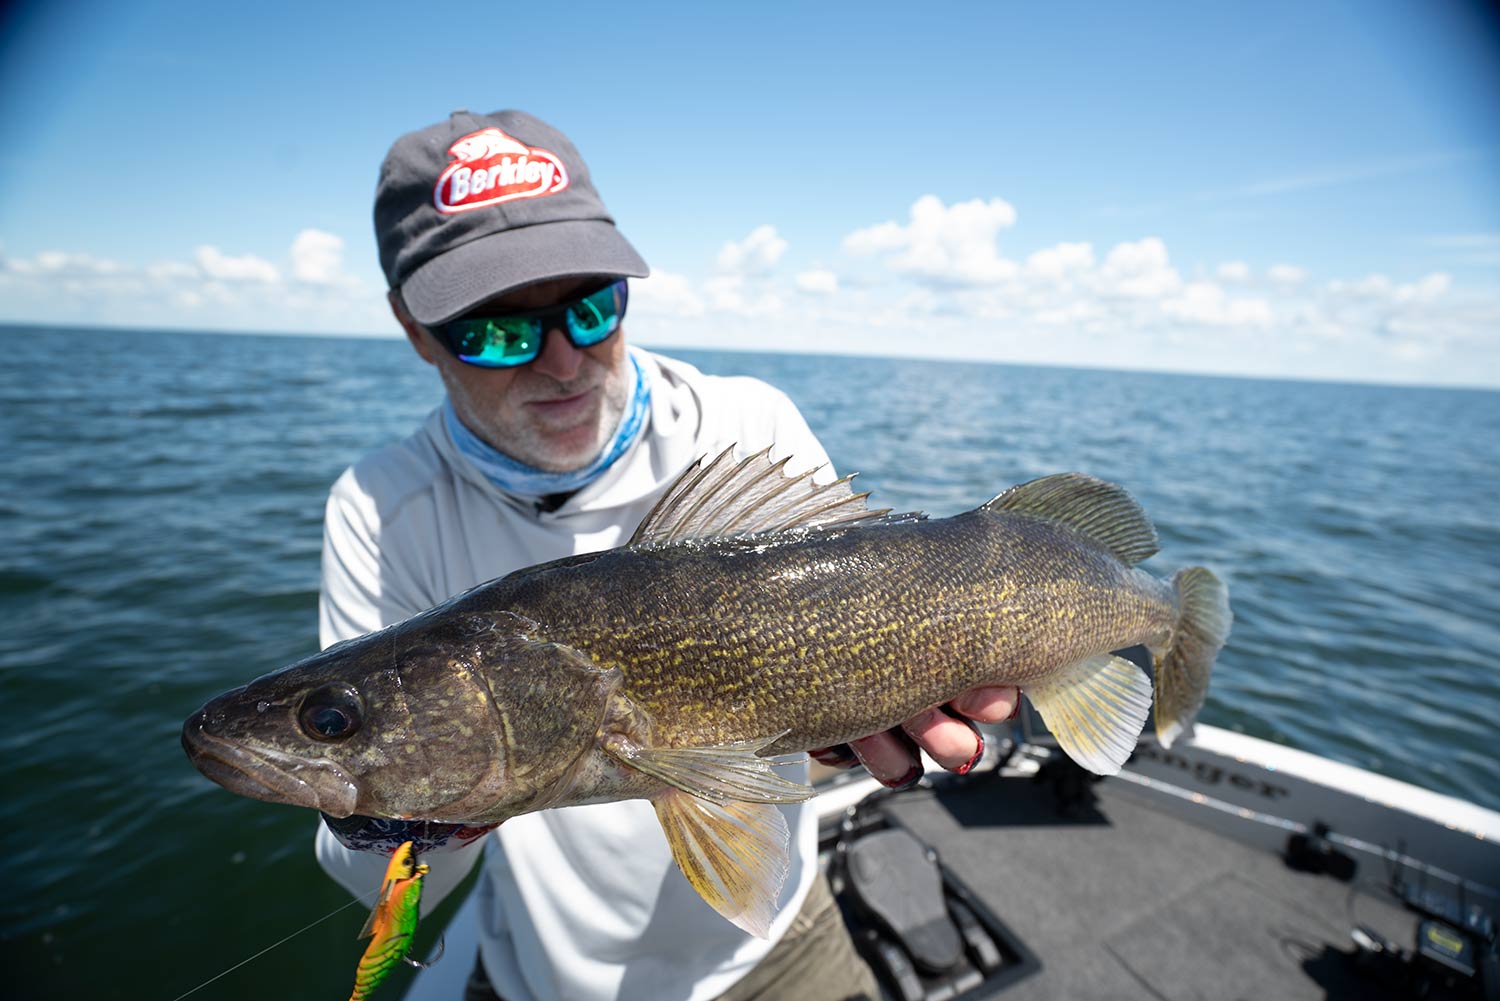 Steven Pennaz holding up a large walleye.